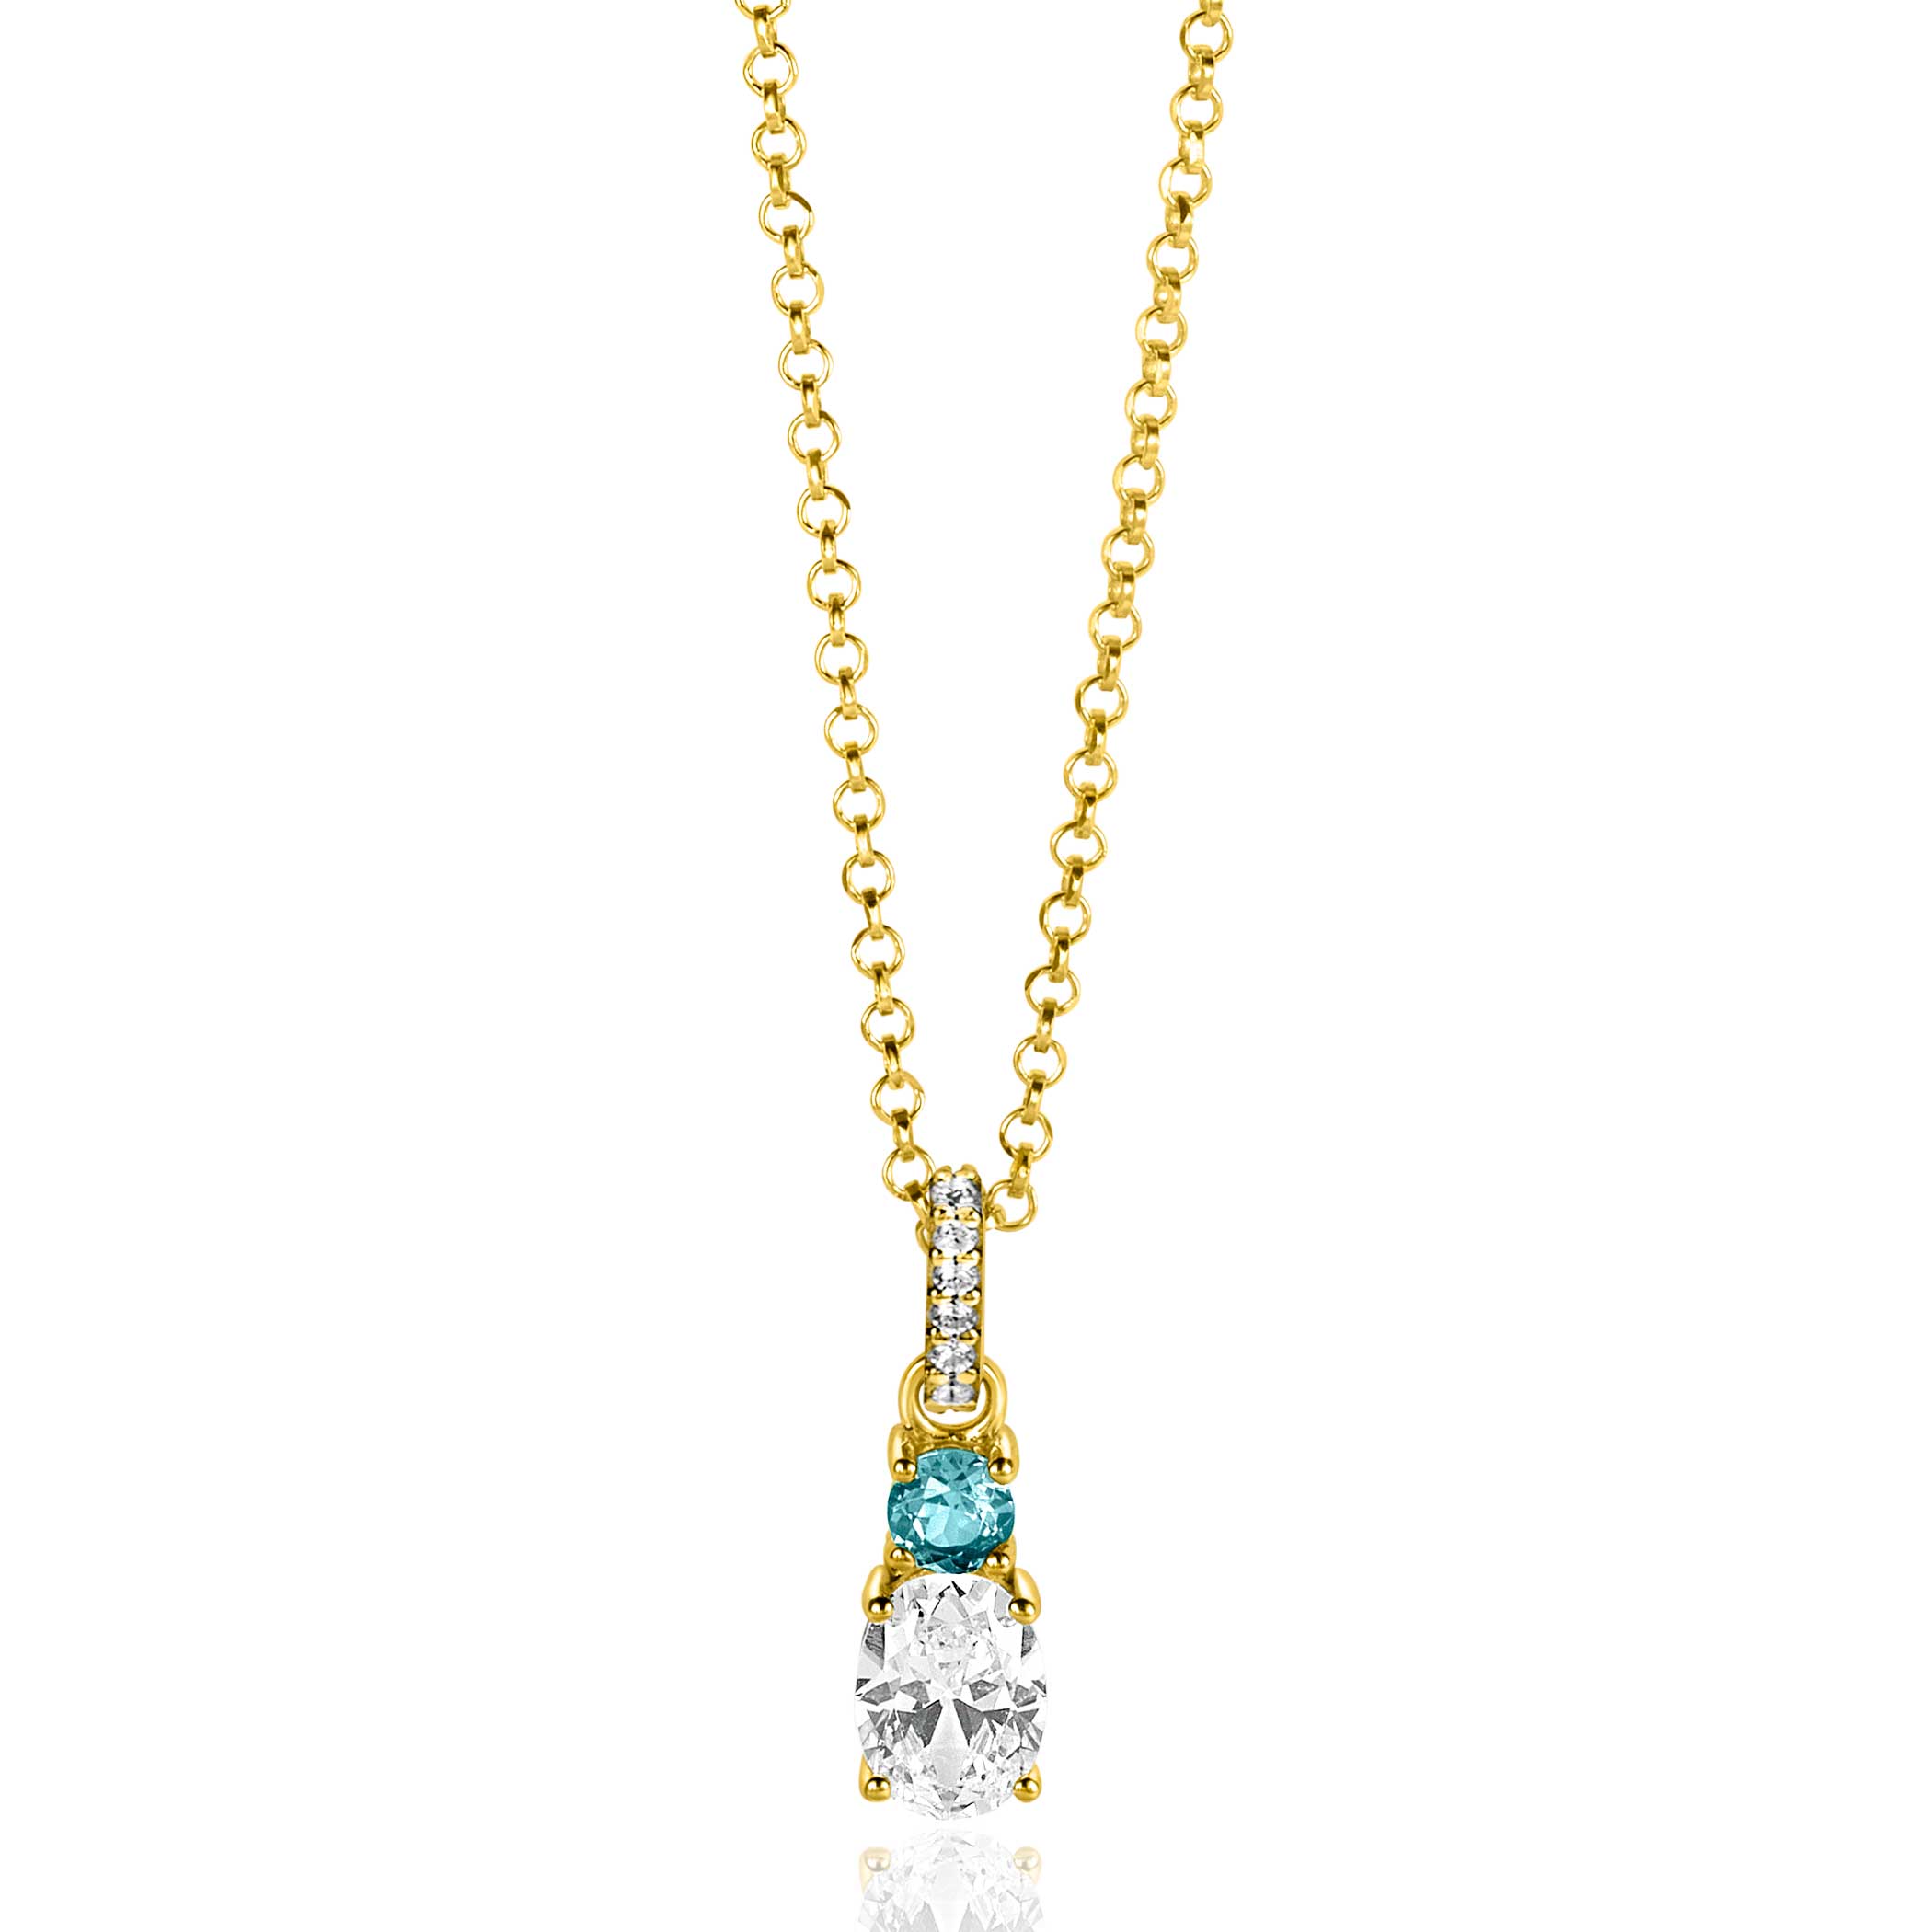 19mm ZINZI Gold Plated Sterling Silver Pendant 2 Prong Settings Blue and White Zirconia with Luxurious Bail ZIH2438 (excl. necklace)